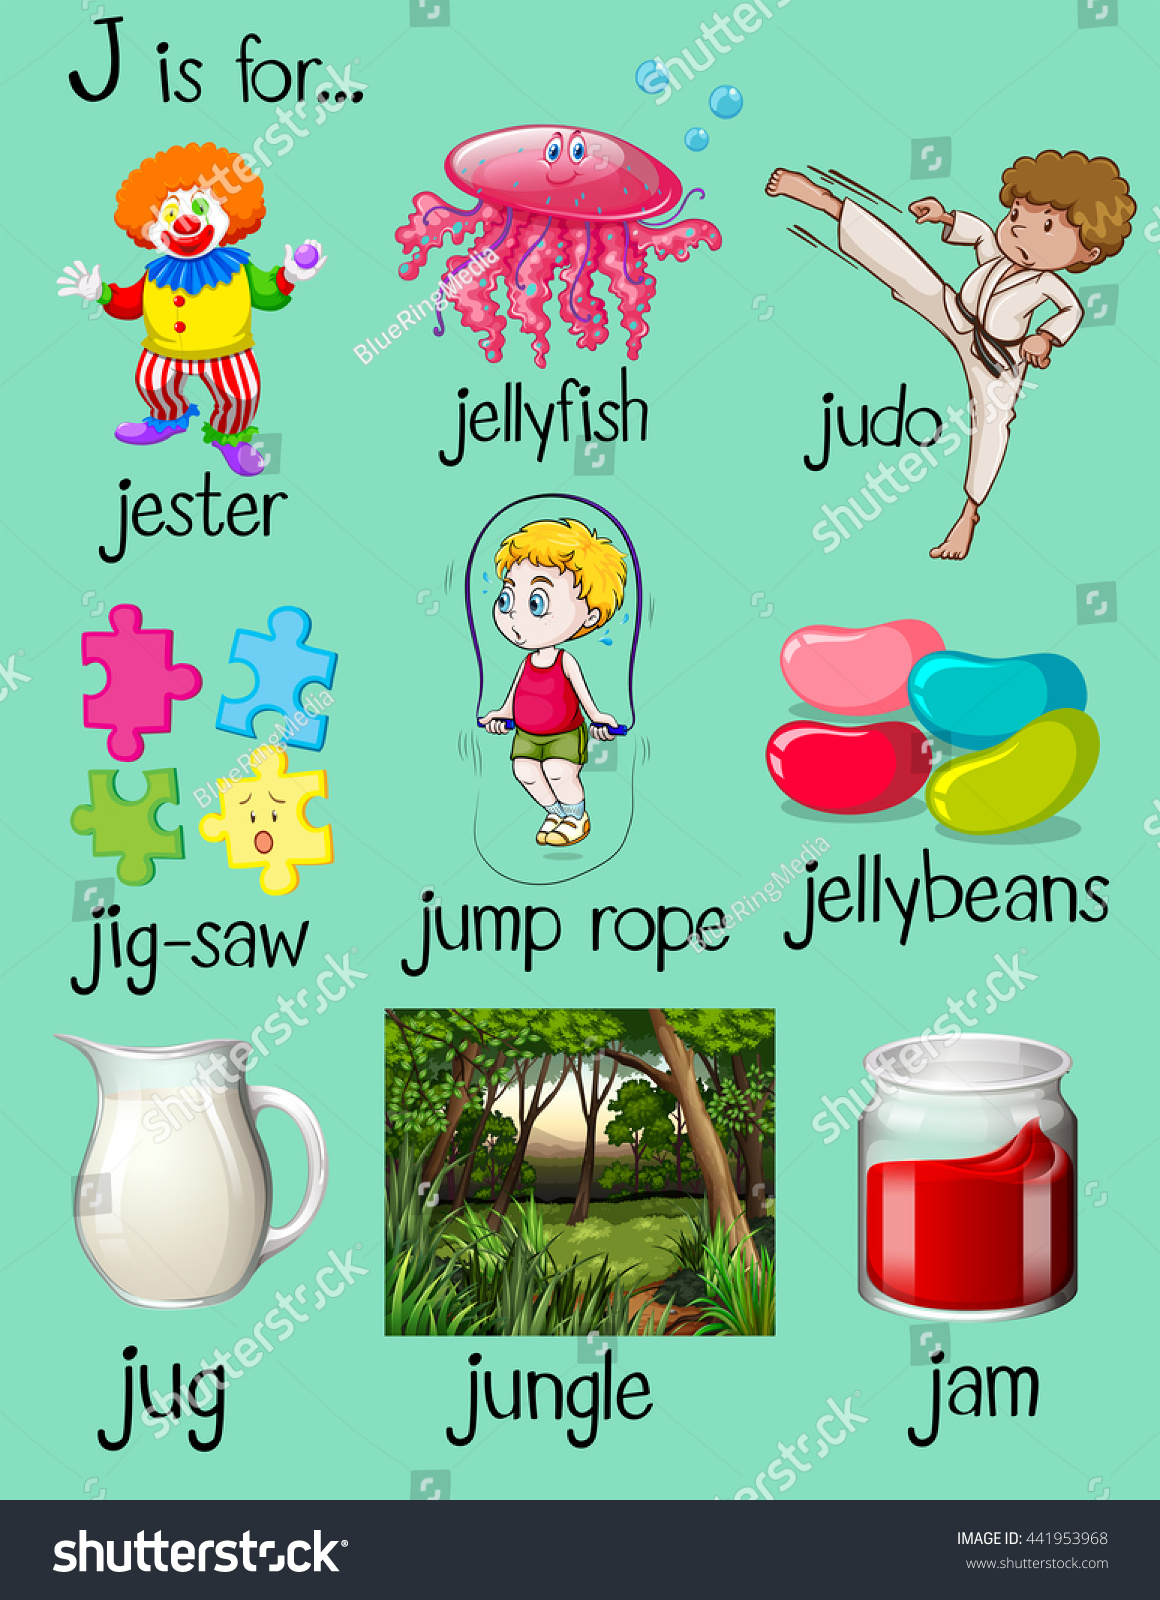 J Alphabet Words - The letter j is crown jewel of the letters in the ...